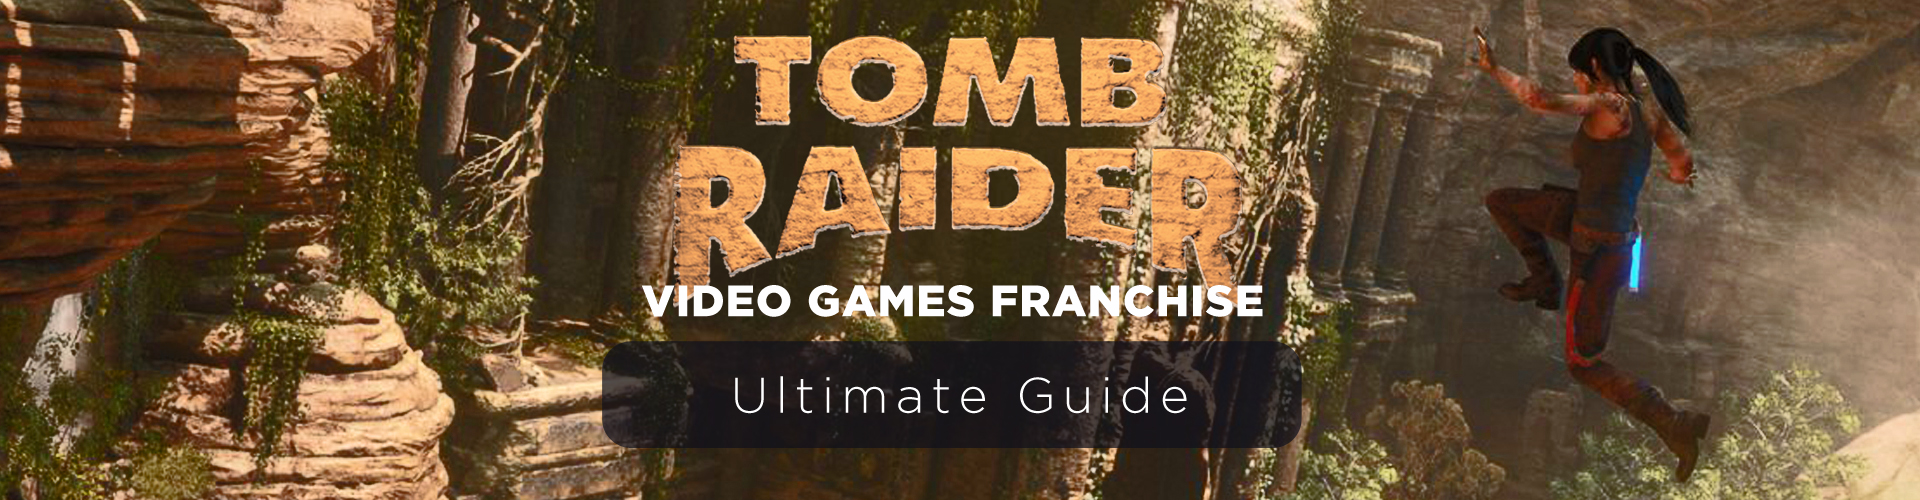 Tomb Raider Franchise Ultimate Guide